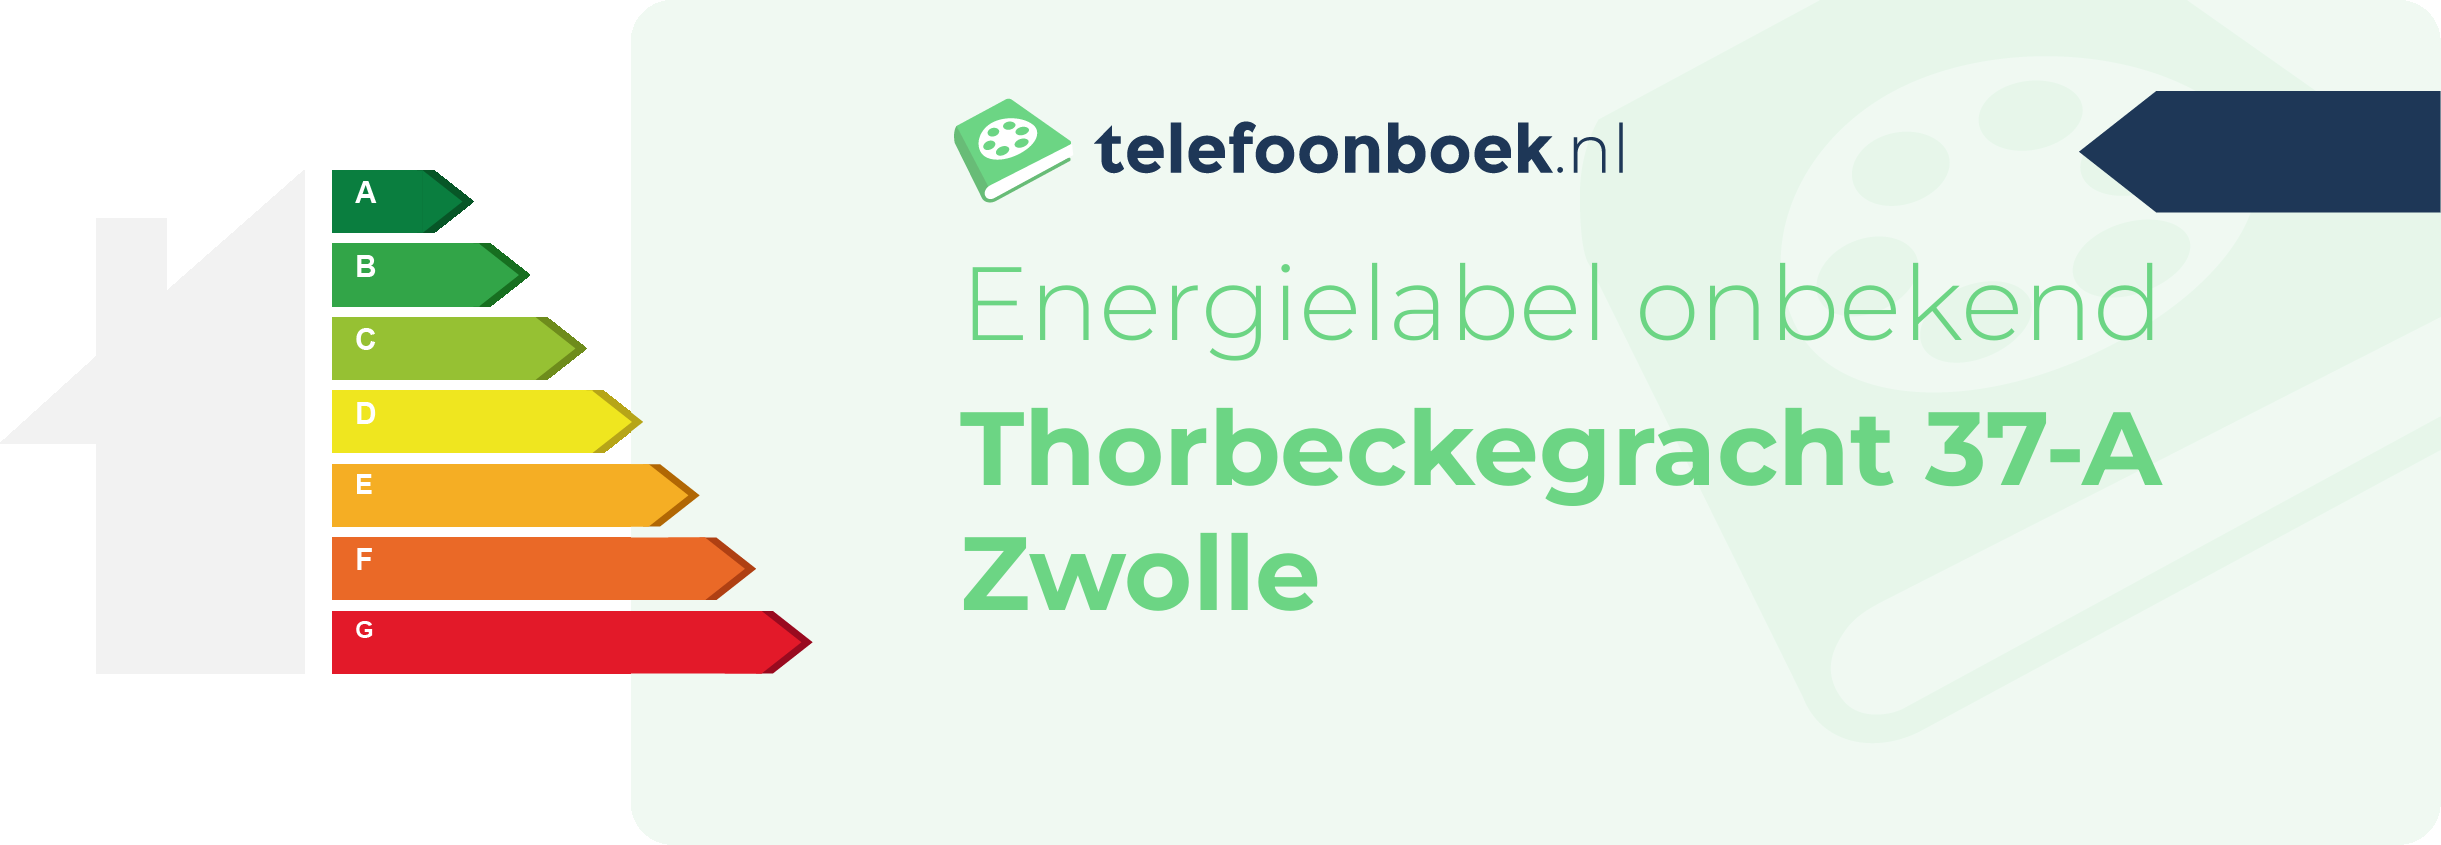 Energielabel Thorbeckegracht 37-A Zwolle